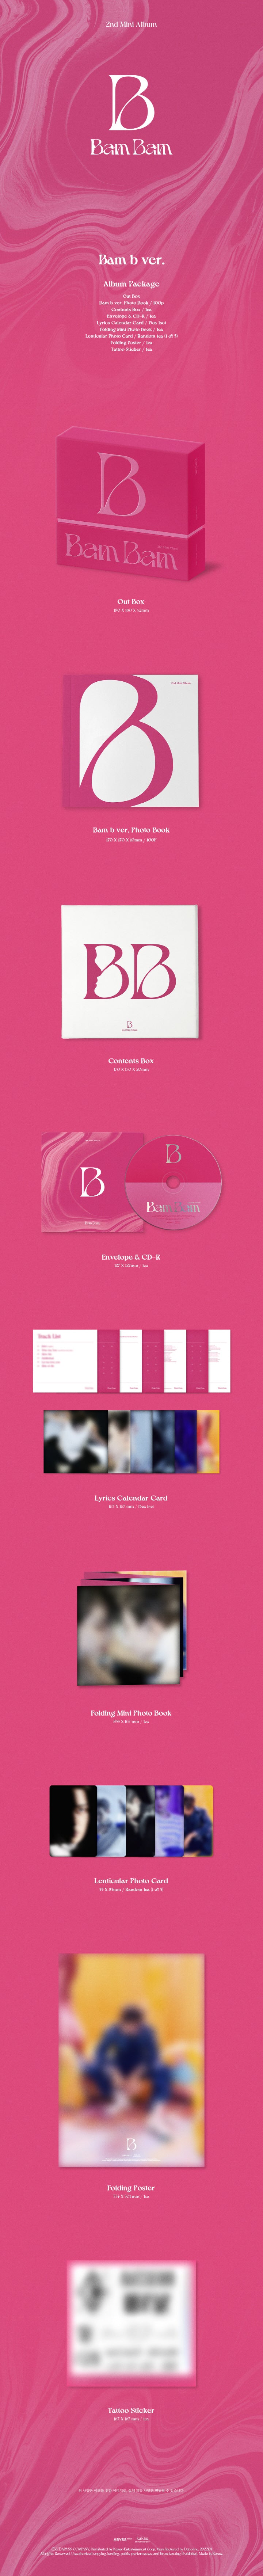 BamBam (BamBam) 2nd Mini Album [B] A world full of infinite possibilities that only BamBam has, [B] Melt slowly into your ...